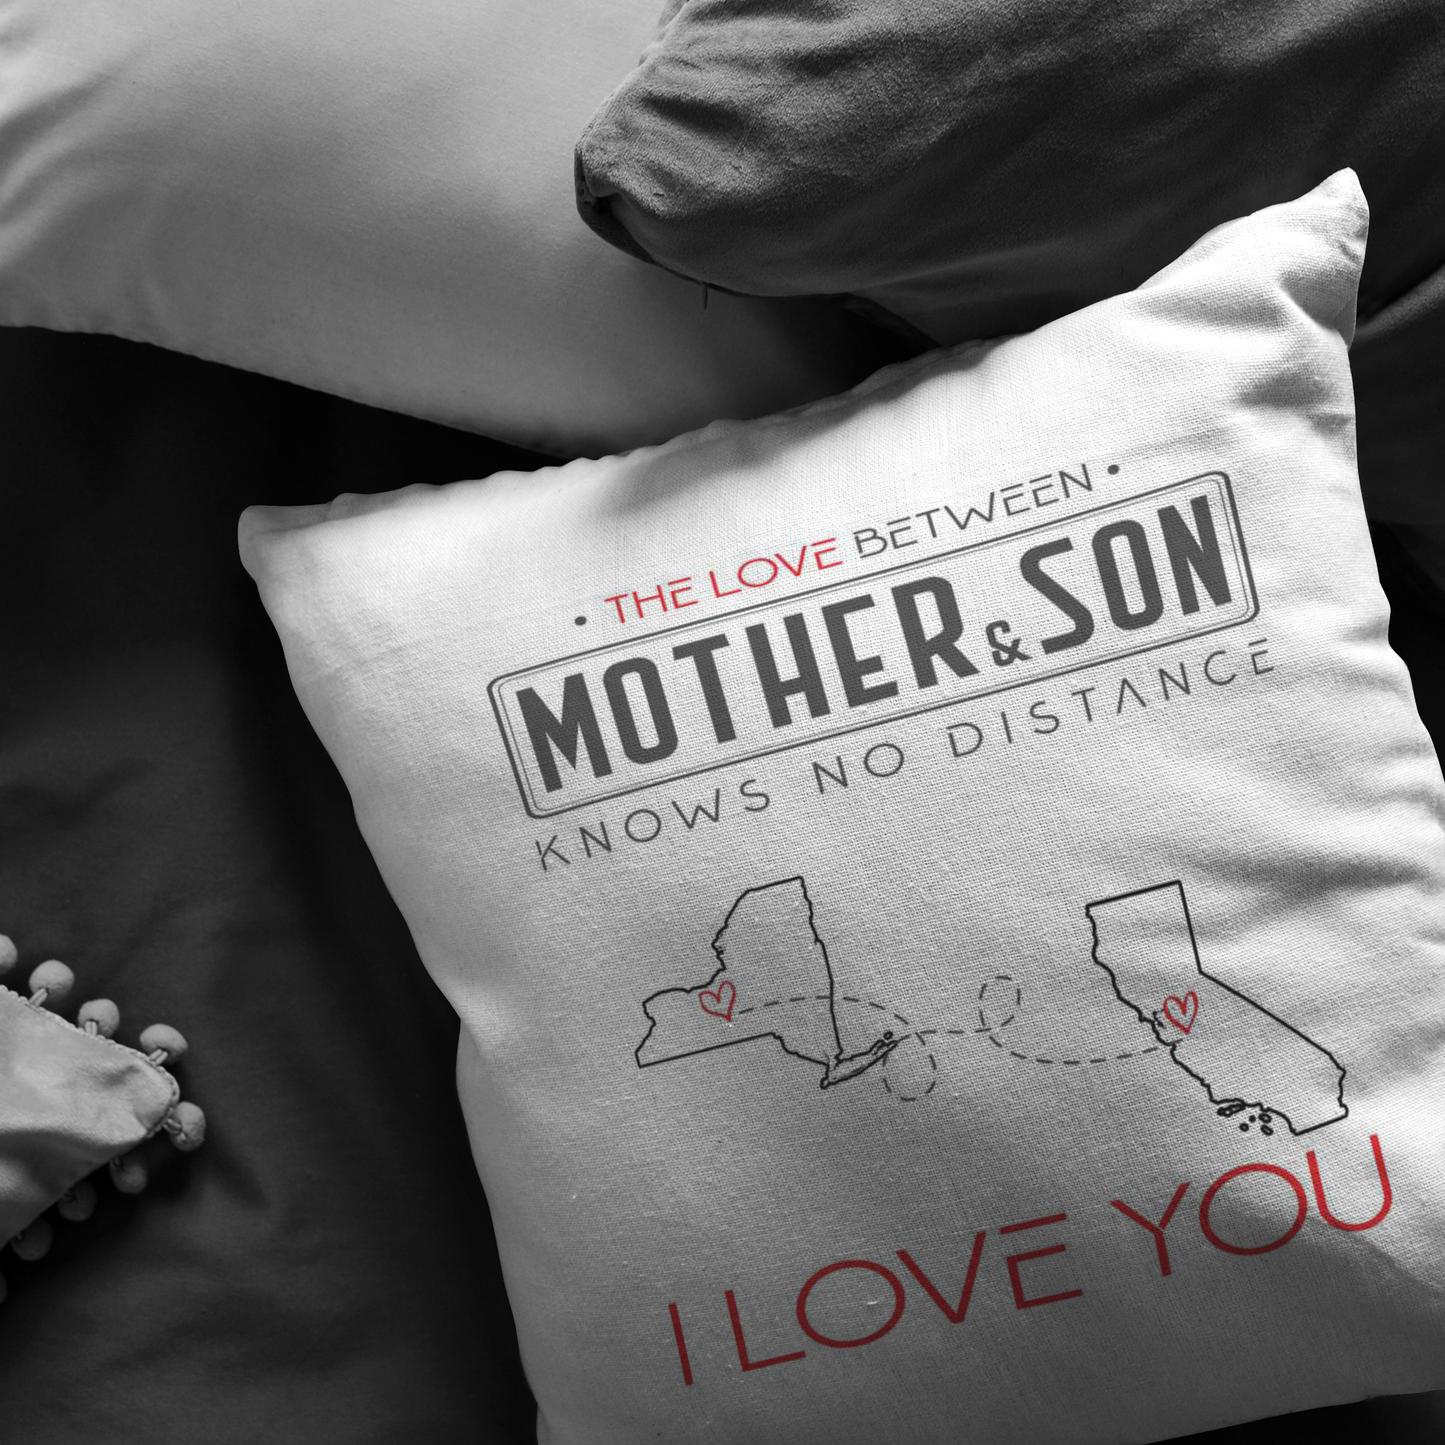 ND-pl20419345-sp-23139 - Mothers Day Gifts From Son - The Love Between Mother  Son